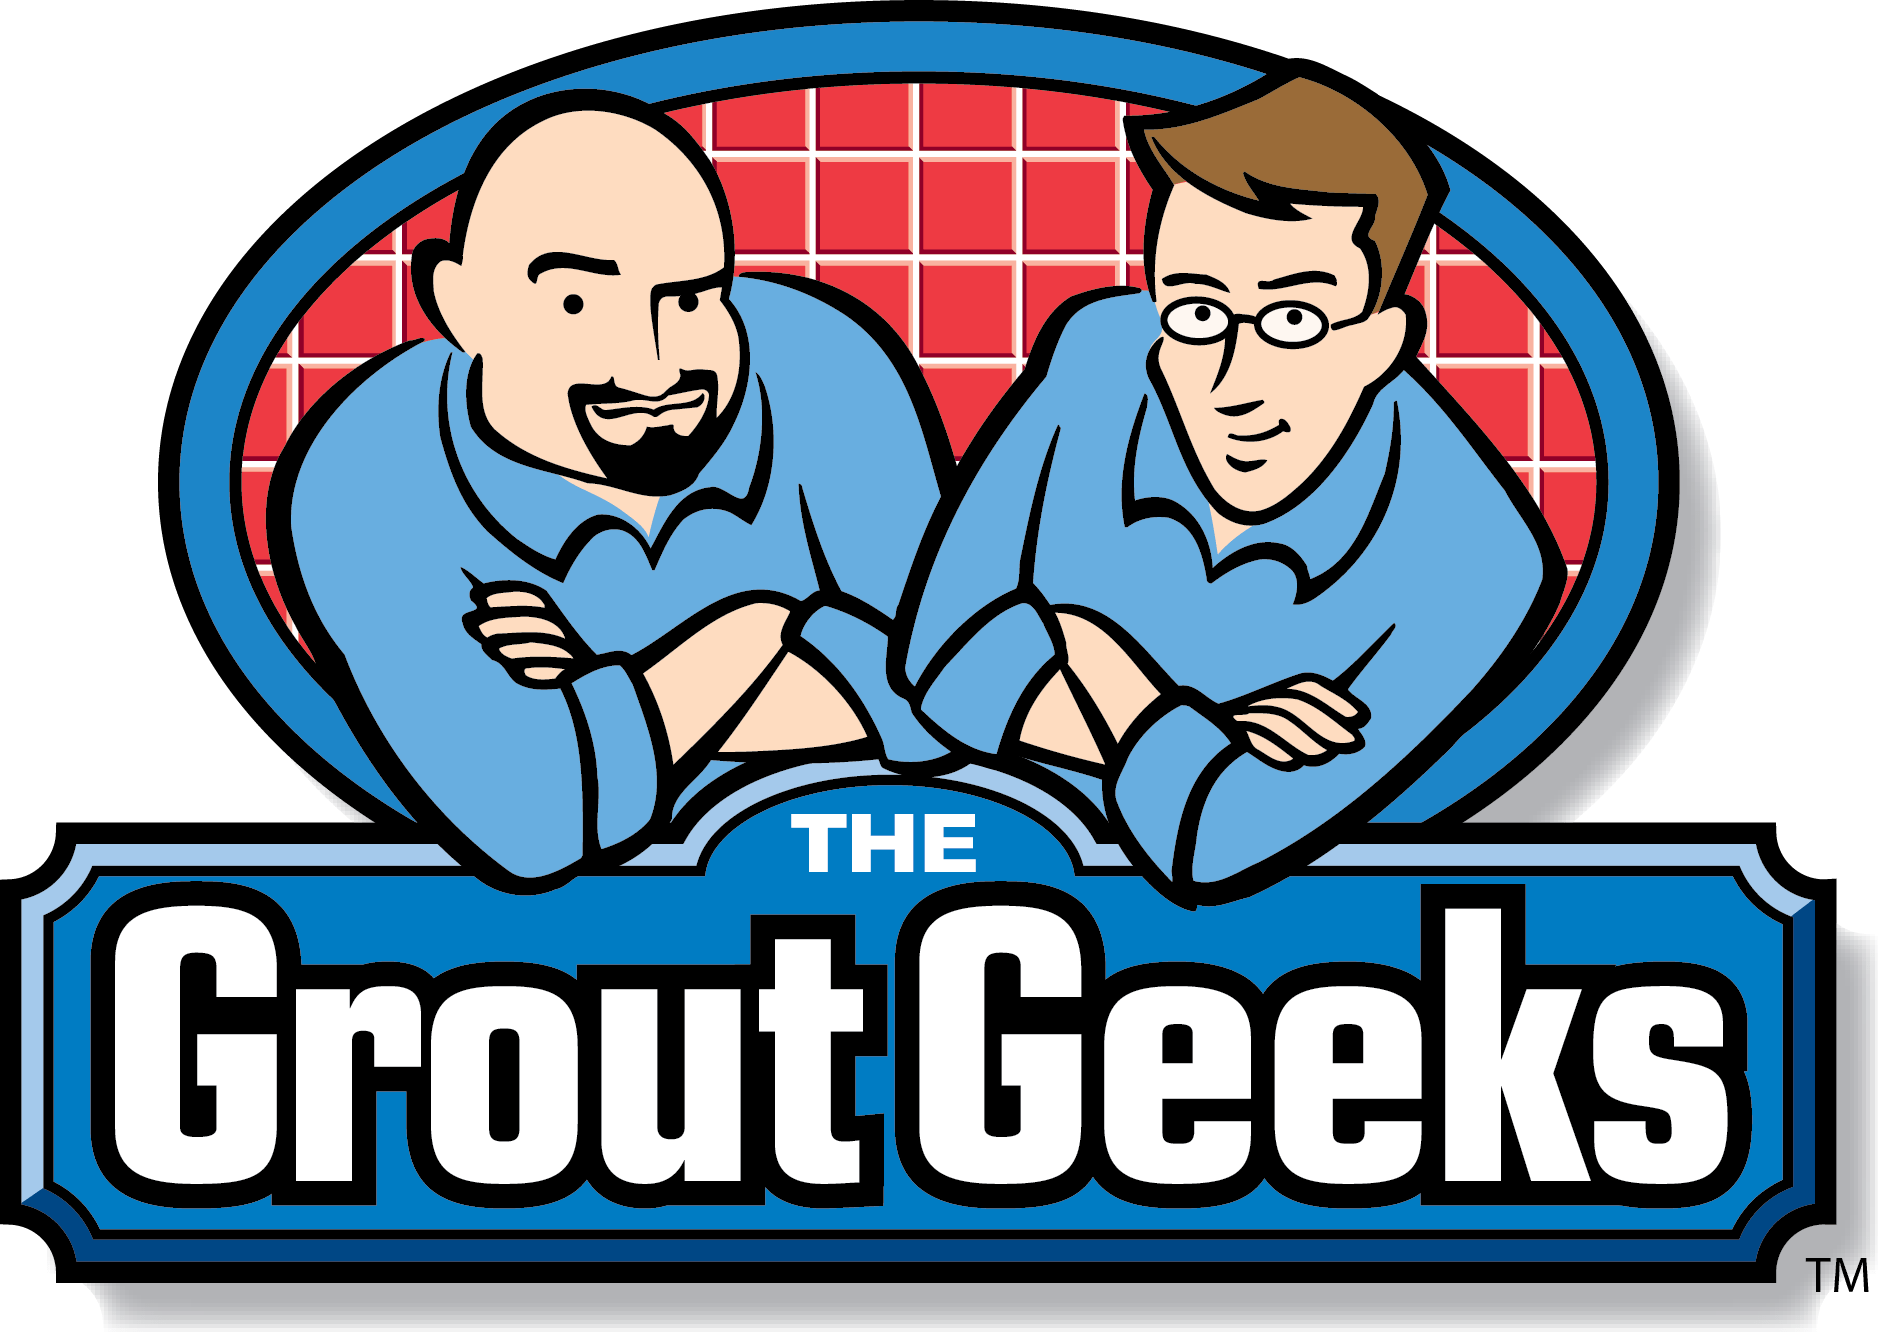 The Grout Geeks